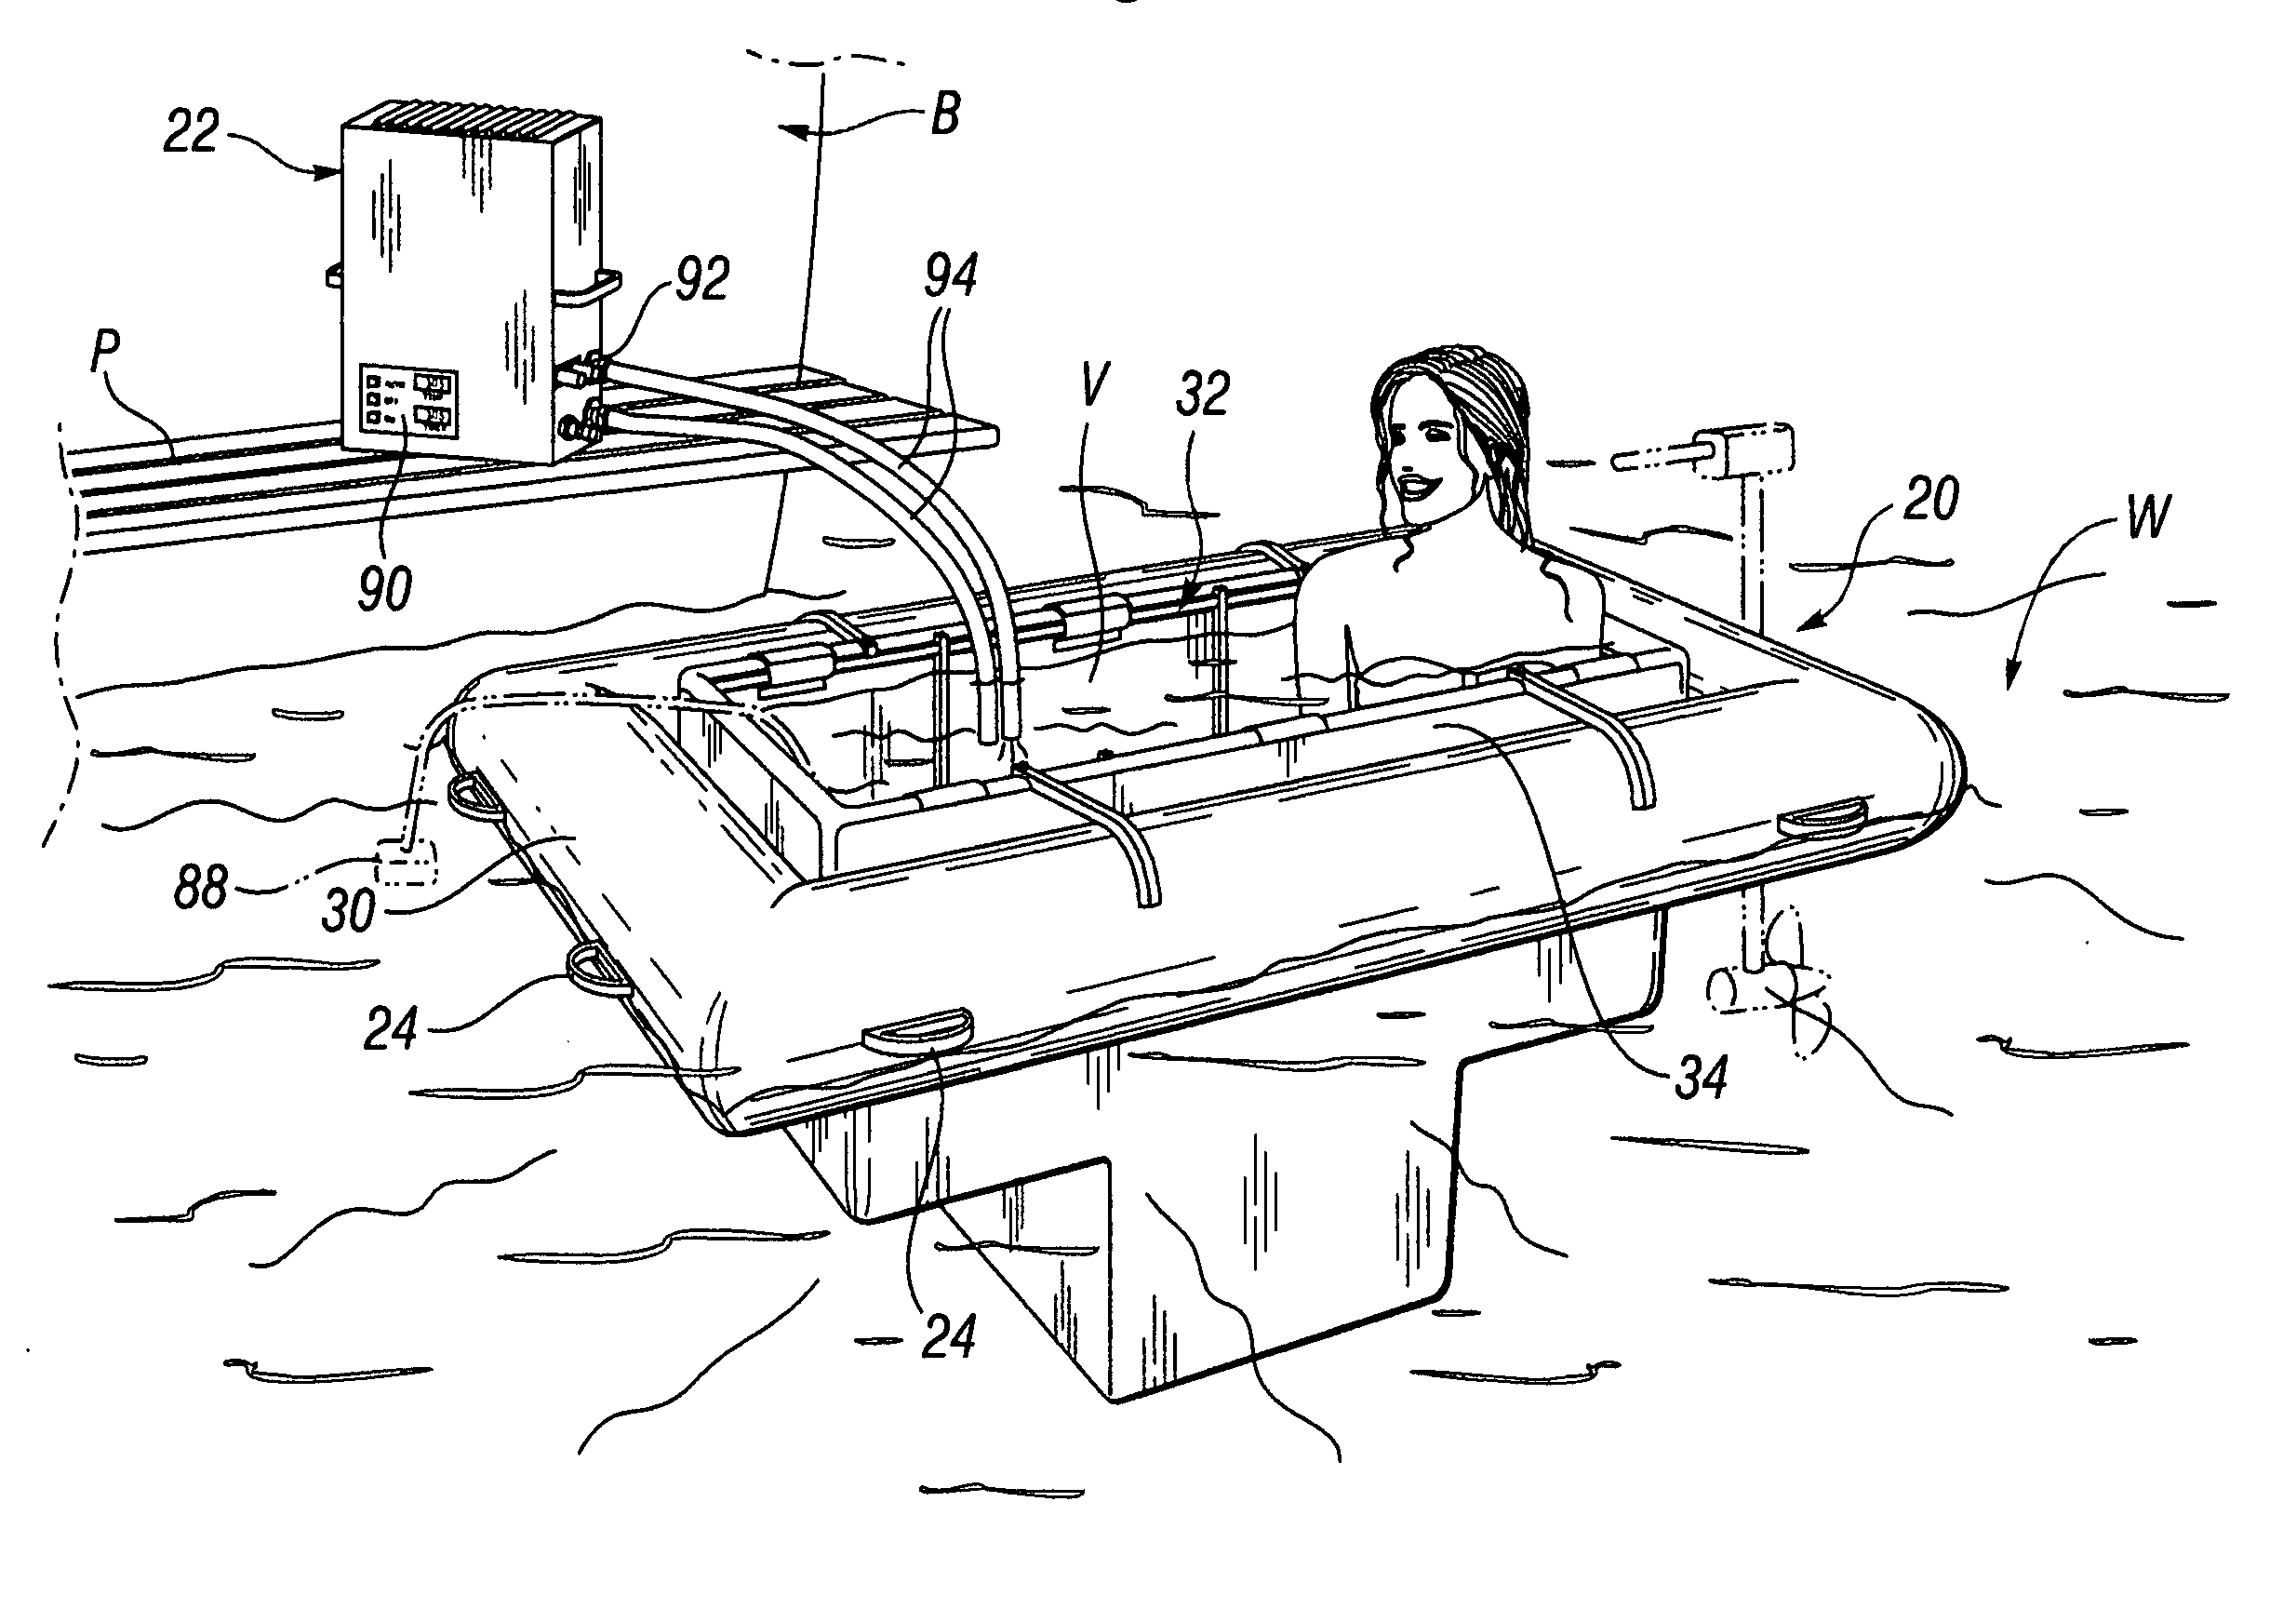 Methods of deploying a portable floating hot tub